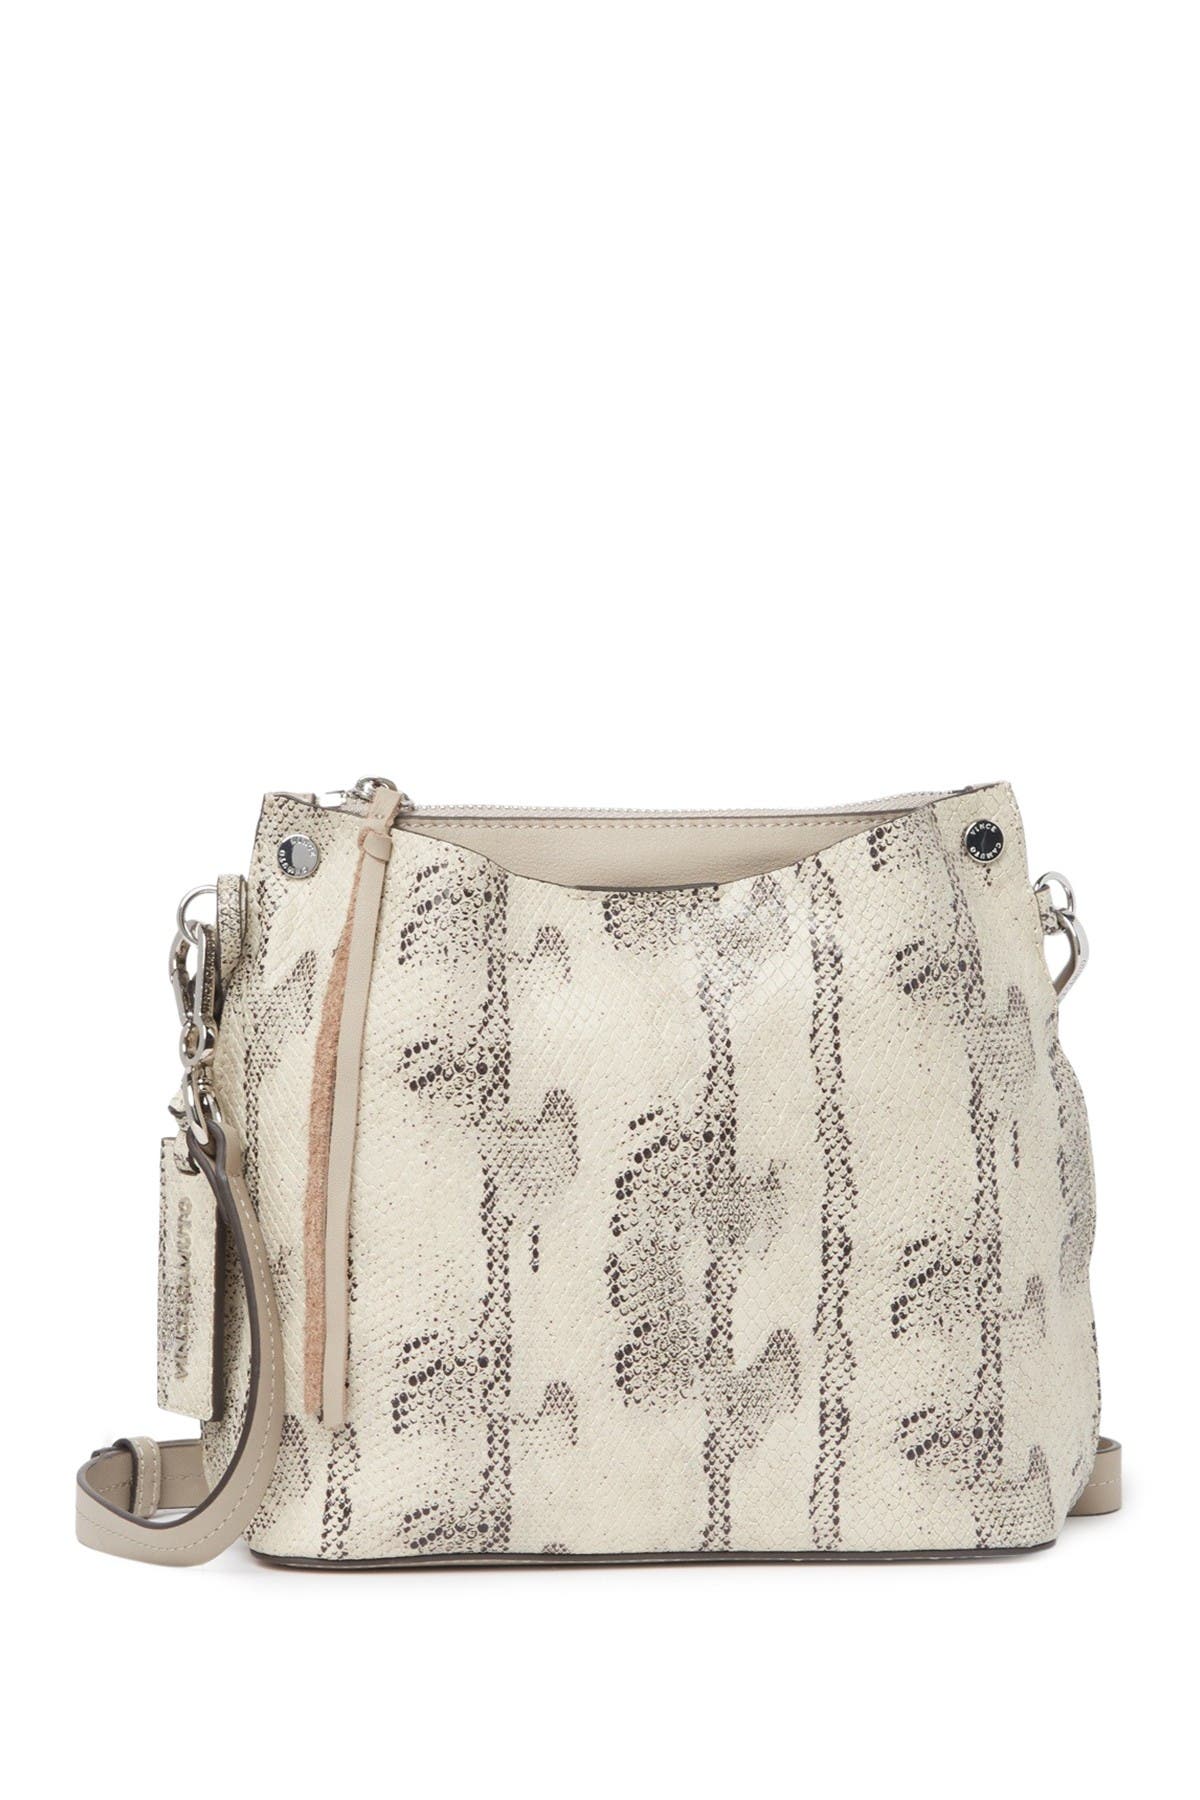 Vince Camuto Mayln Leather Crossbody Bag In Natural 03